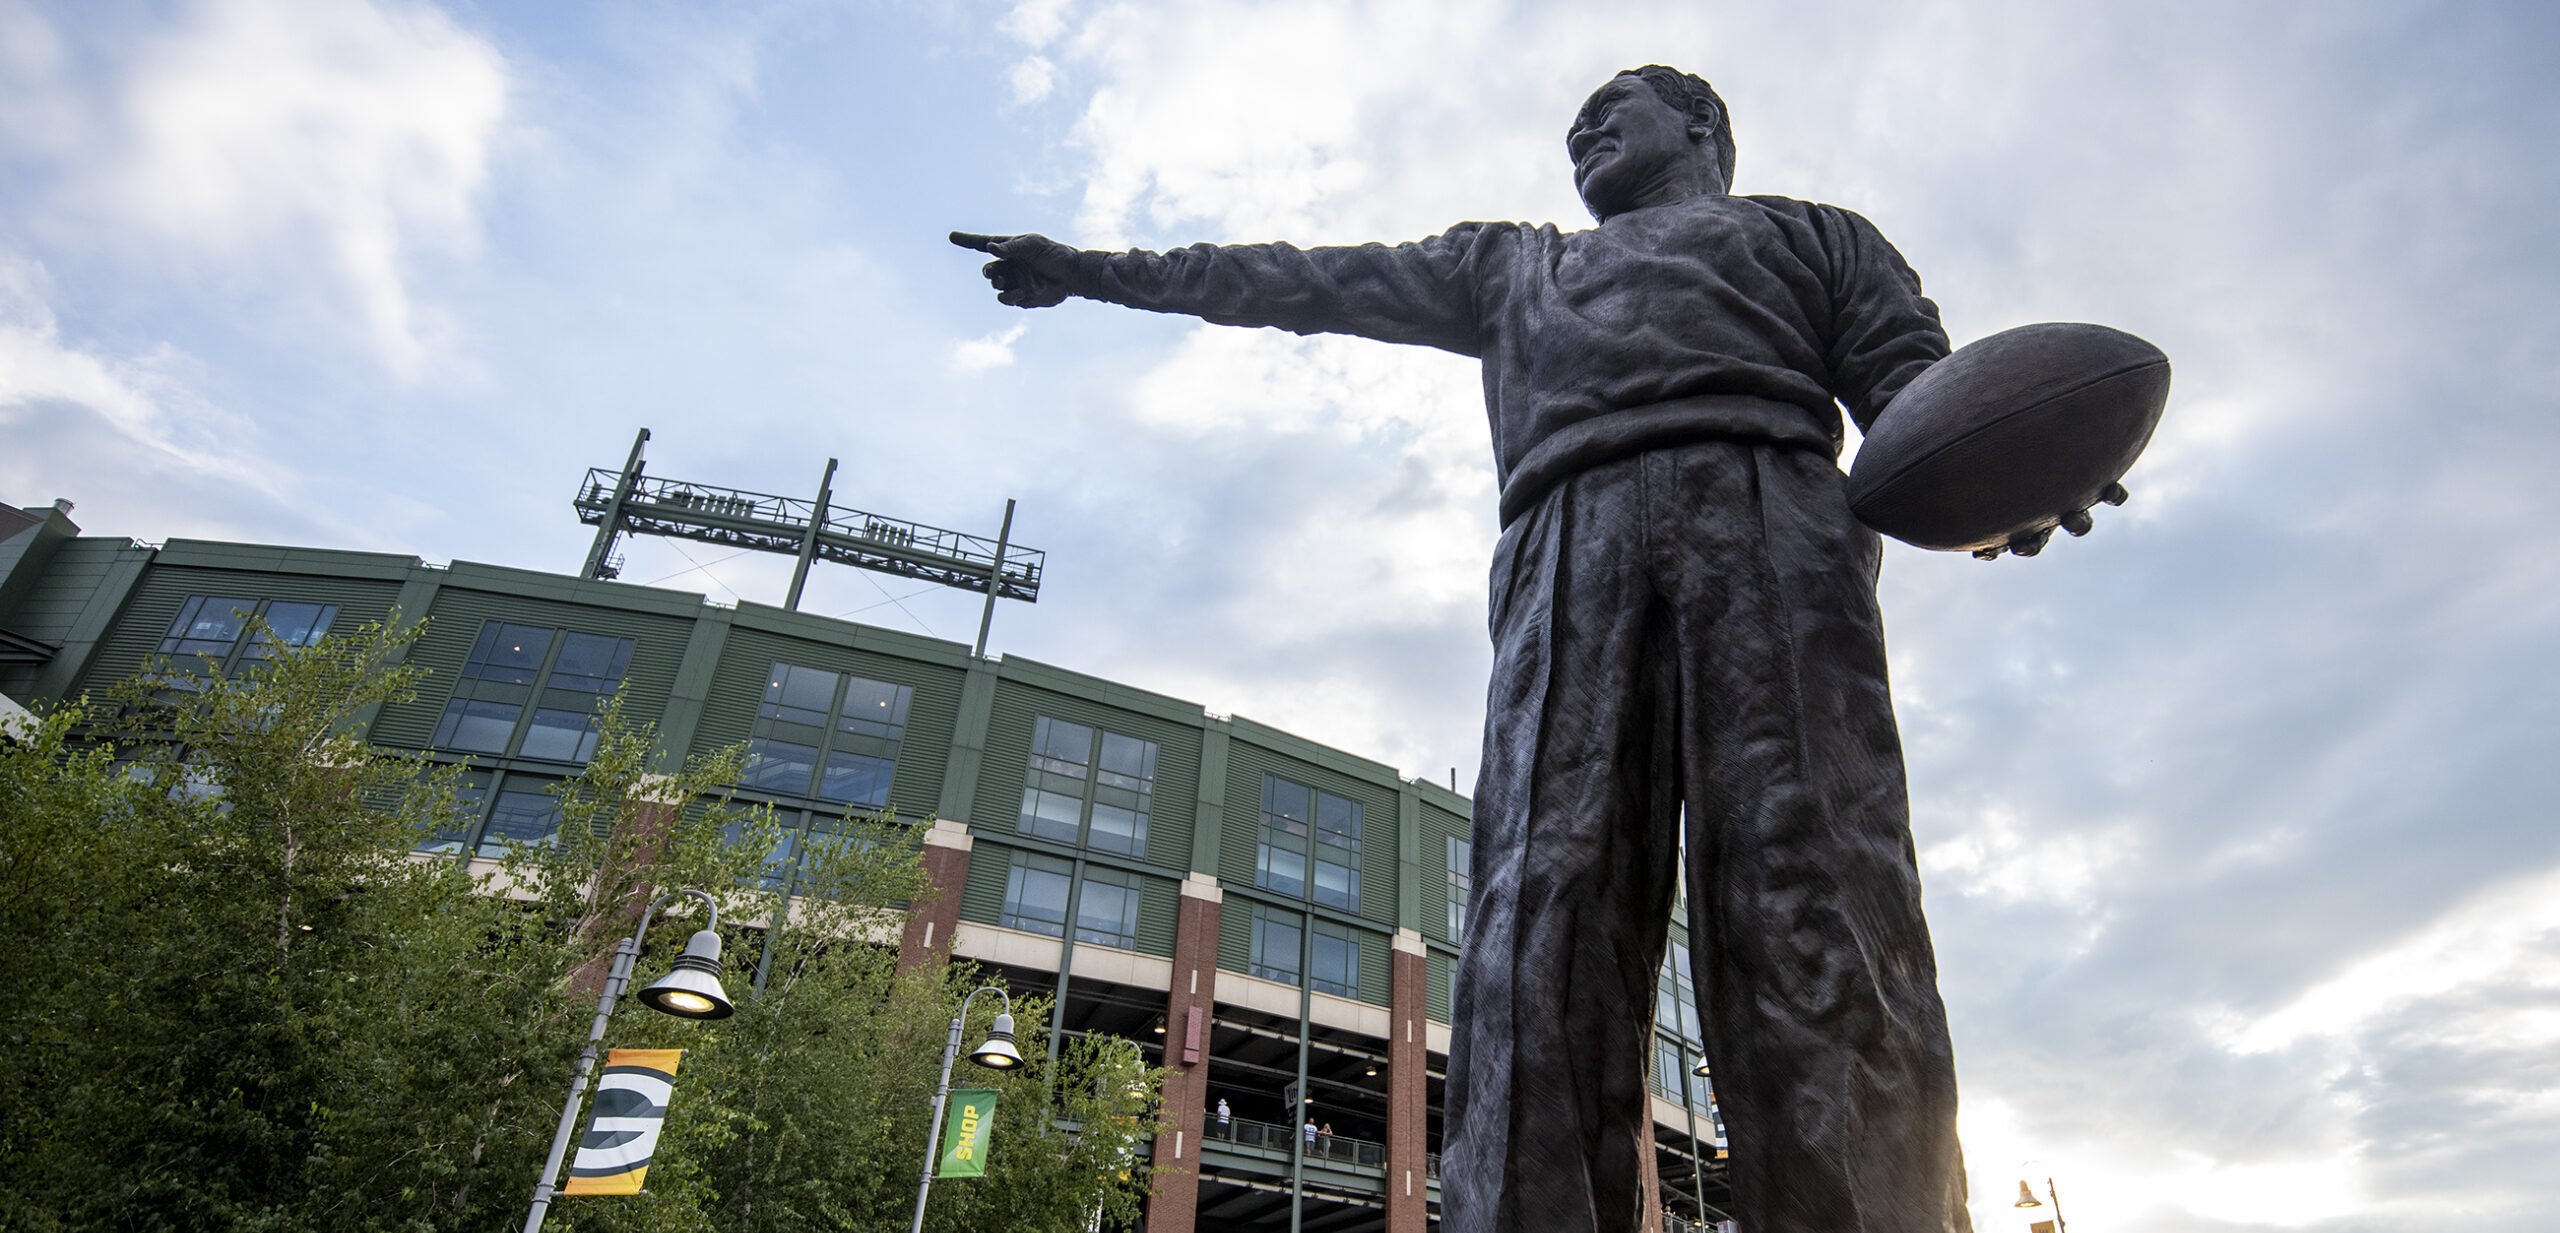 A statue of a man holding a football with his arm outstretched is seen in front of Lambeau Field.